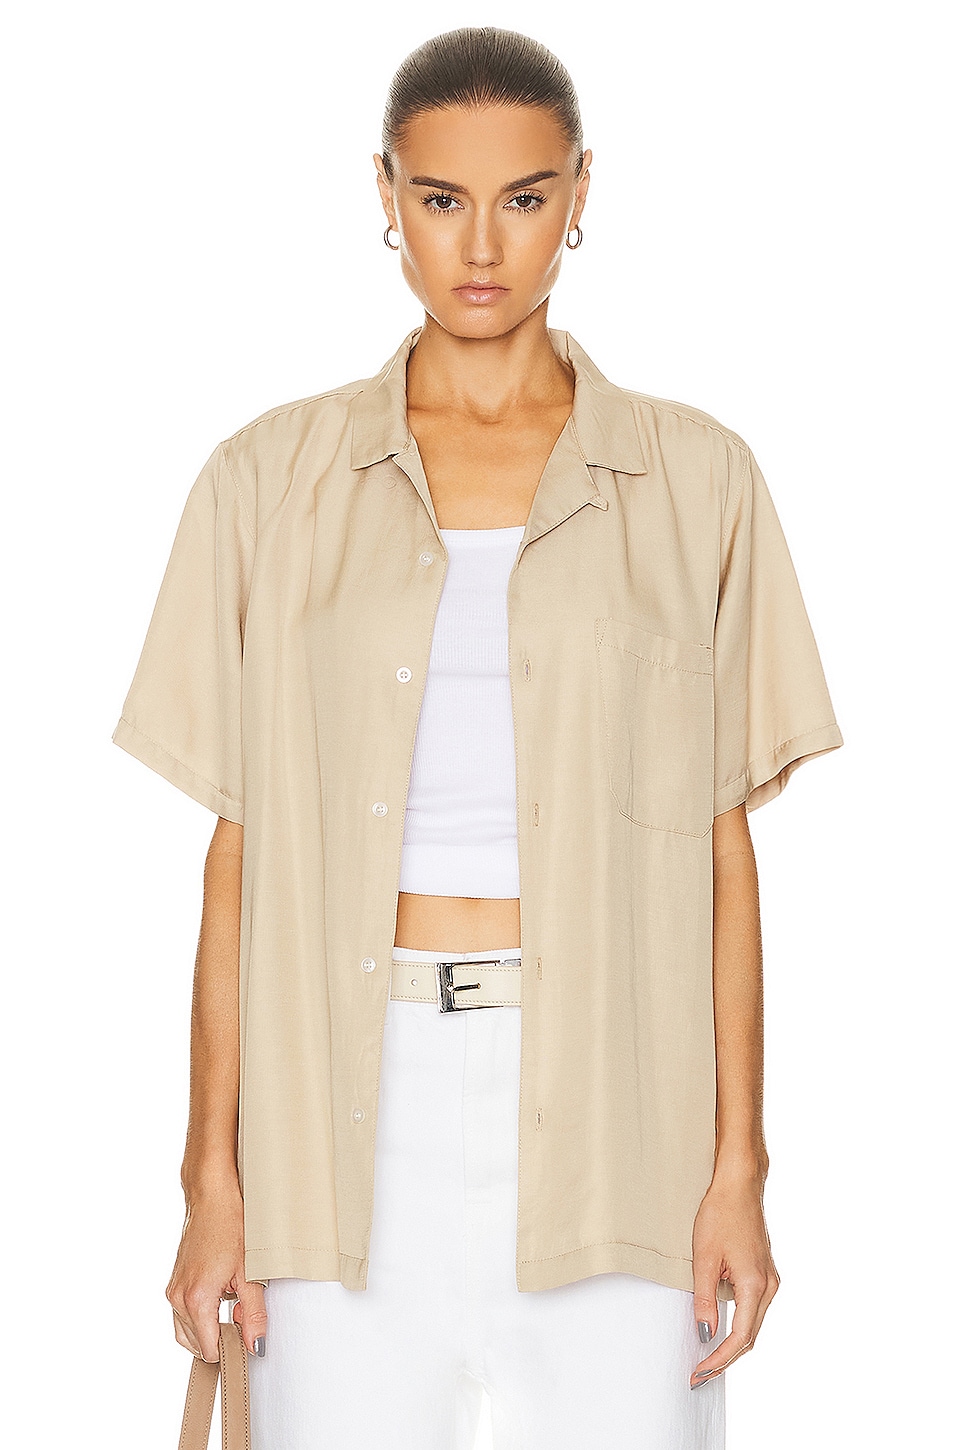 The Camp Shirt in Tan